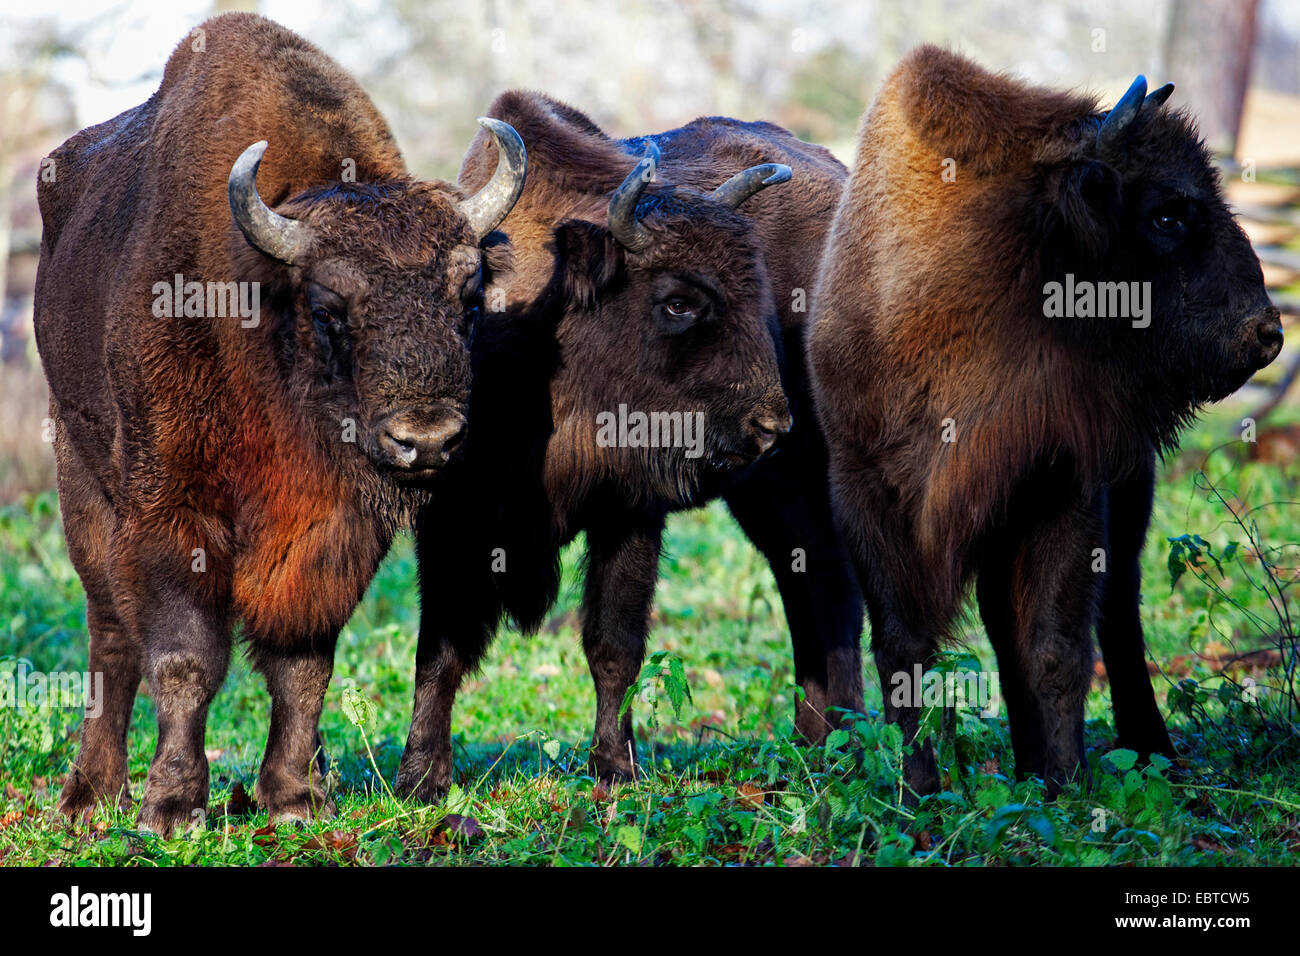 European bison, wisent (Bison bonasus), three wisents standing in a meadow, Germany Stock Photo